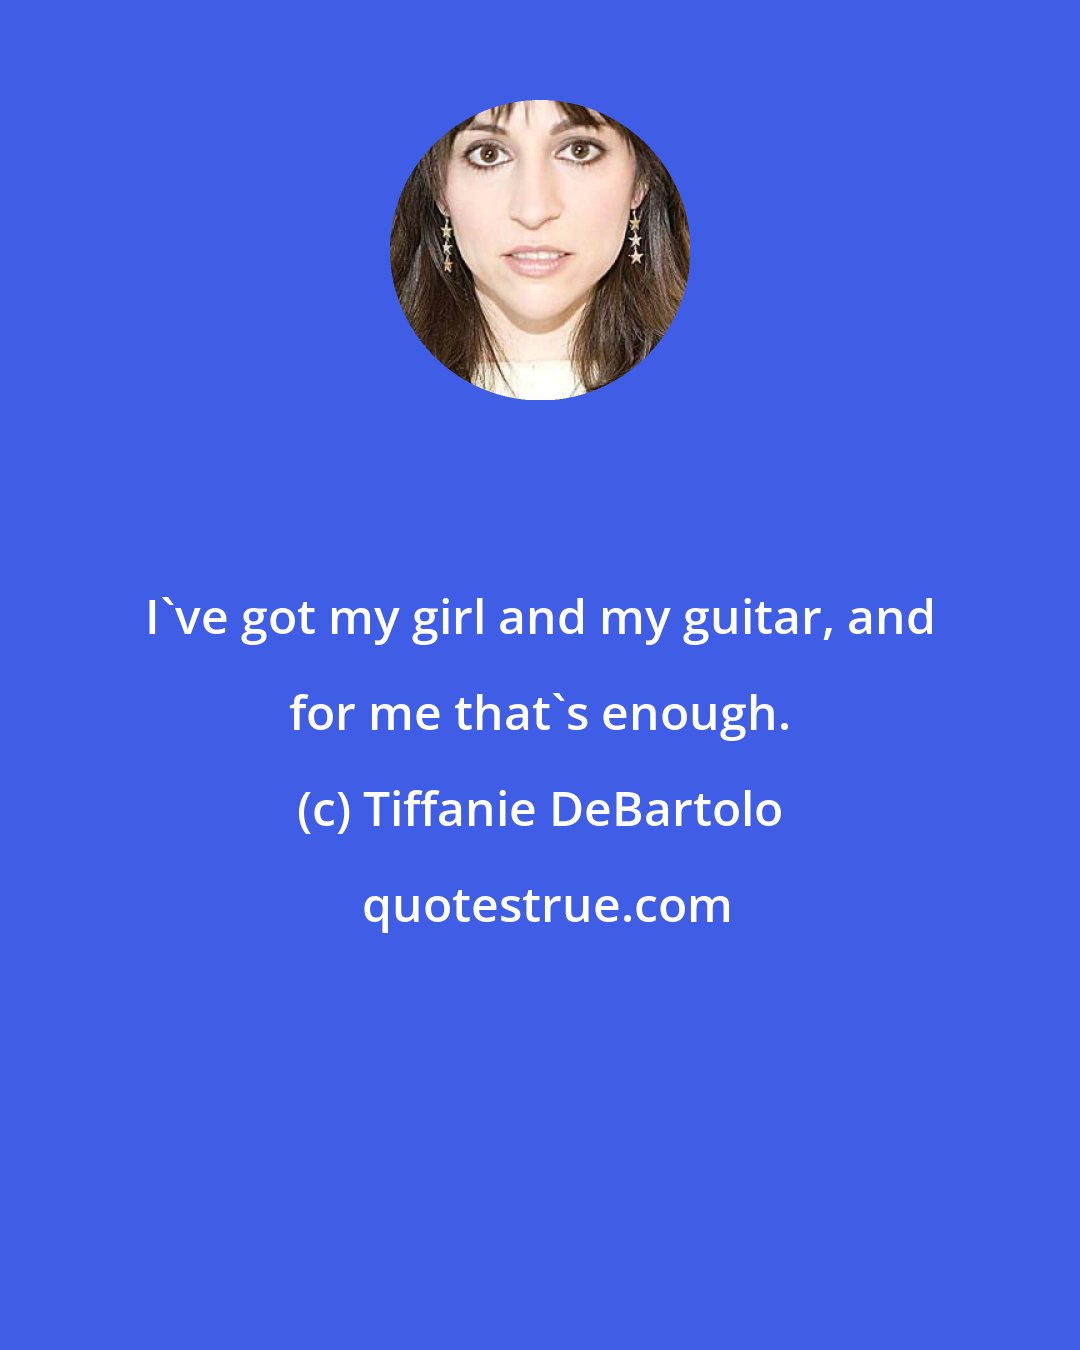 Tiffanie DeBartolo: I've got my girl and my guitar, and for me that's enough.